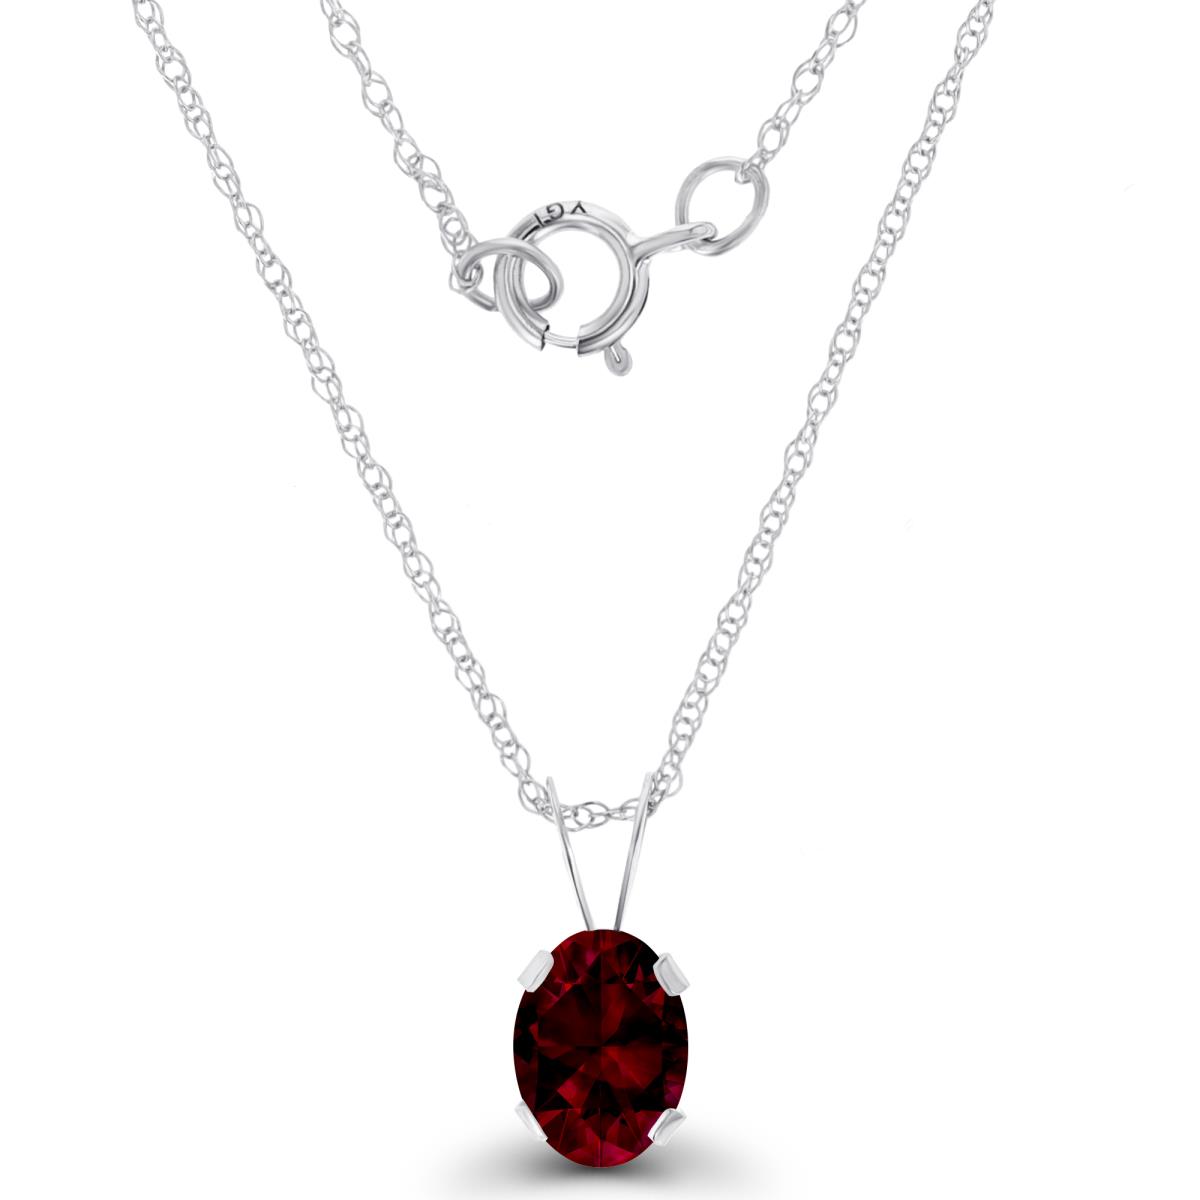 14K White Gold 7x5mm Oval Garnet 18" Rope Chain Necklace